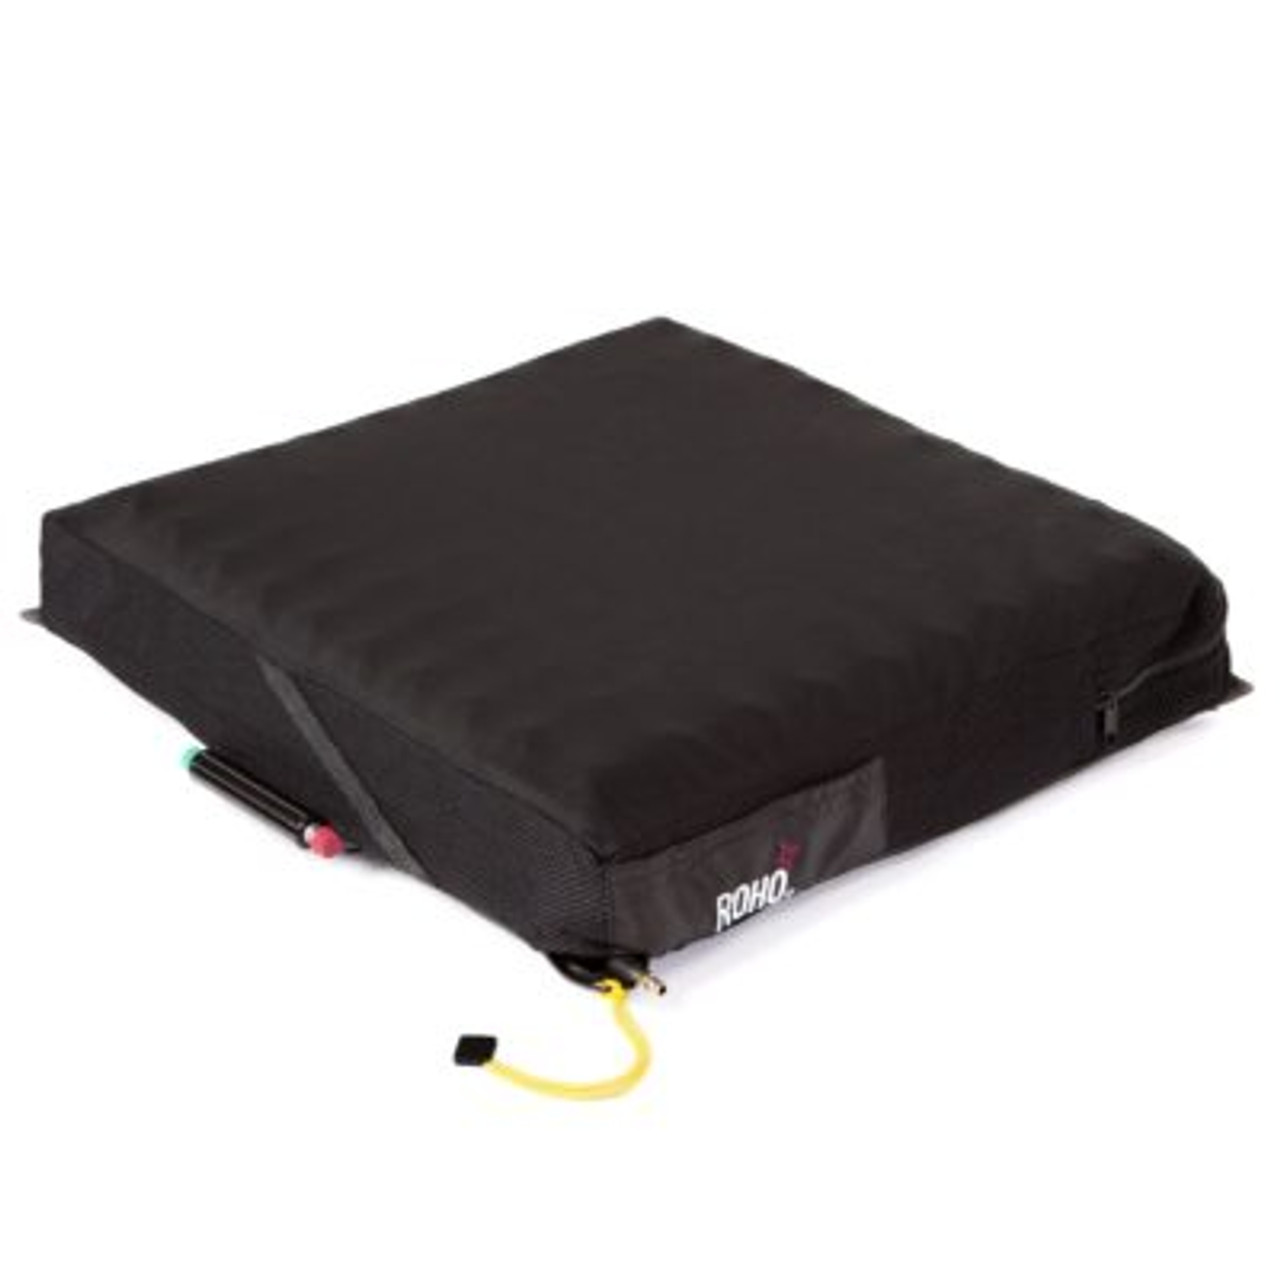 Warehouse Sale Product- Replacement Wheelchair Cushion Cover 16x16x4.25 (all models)